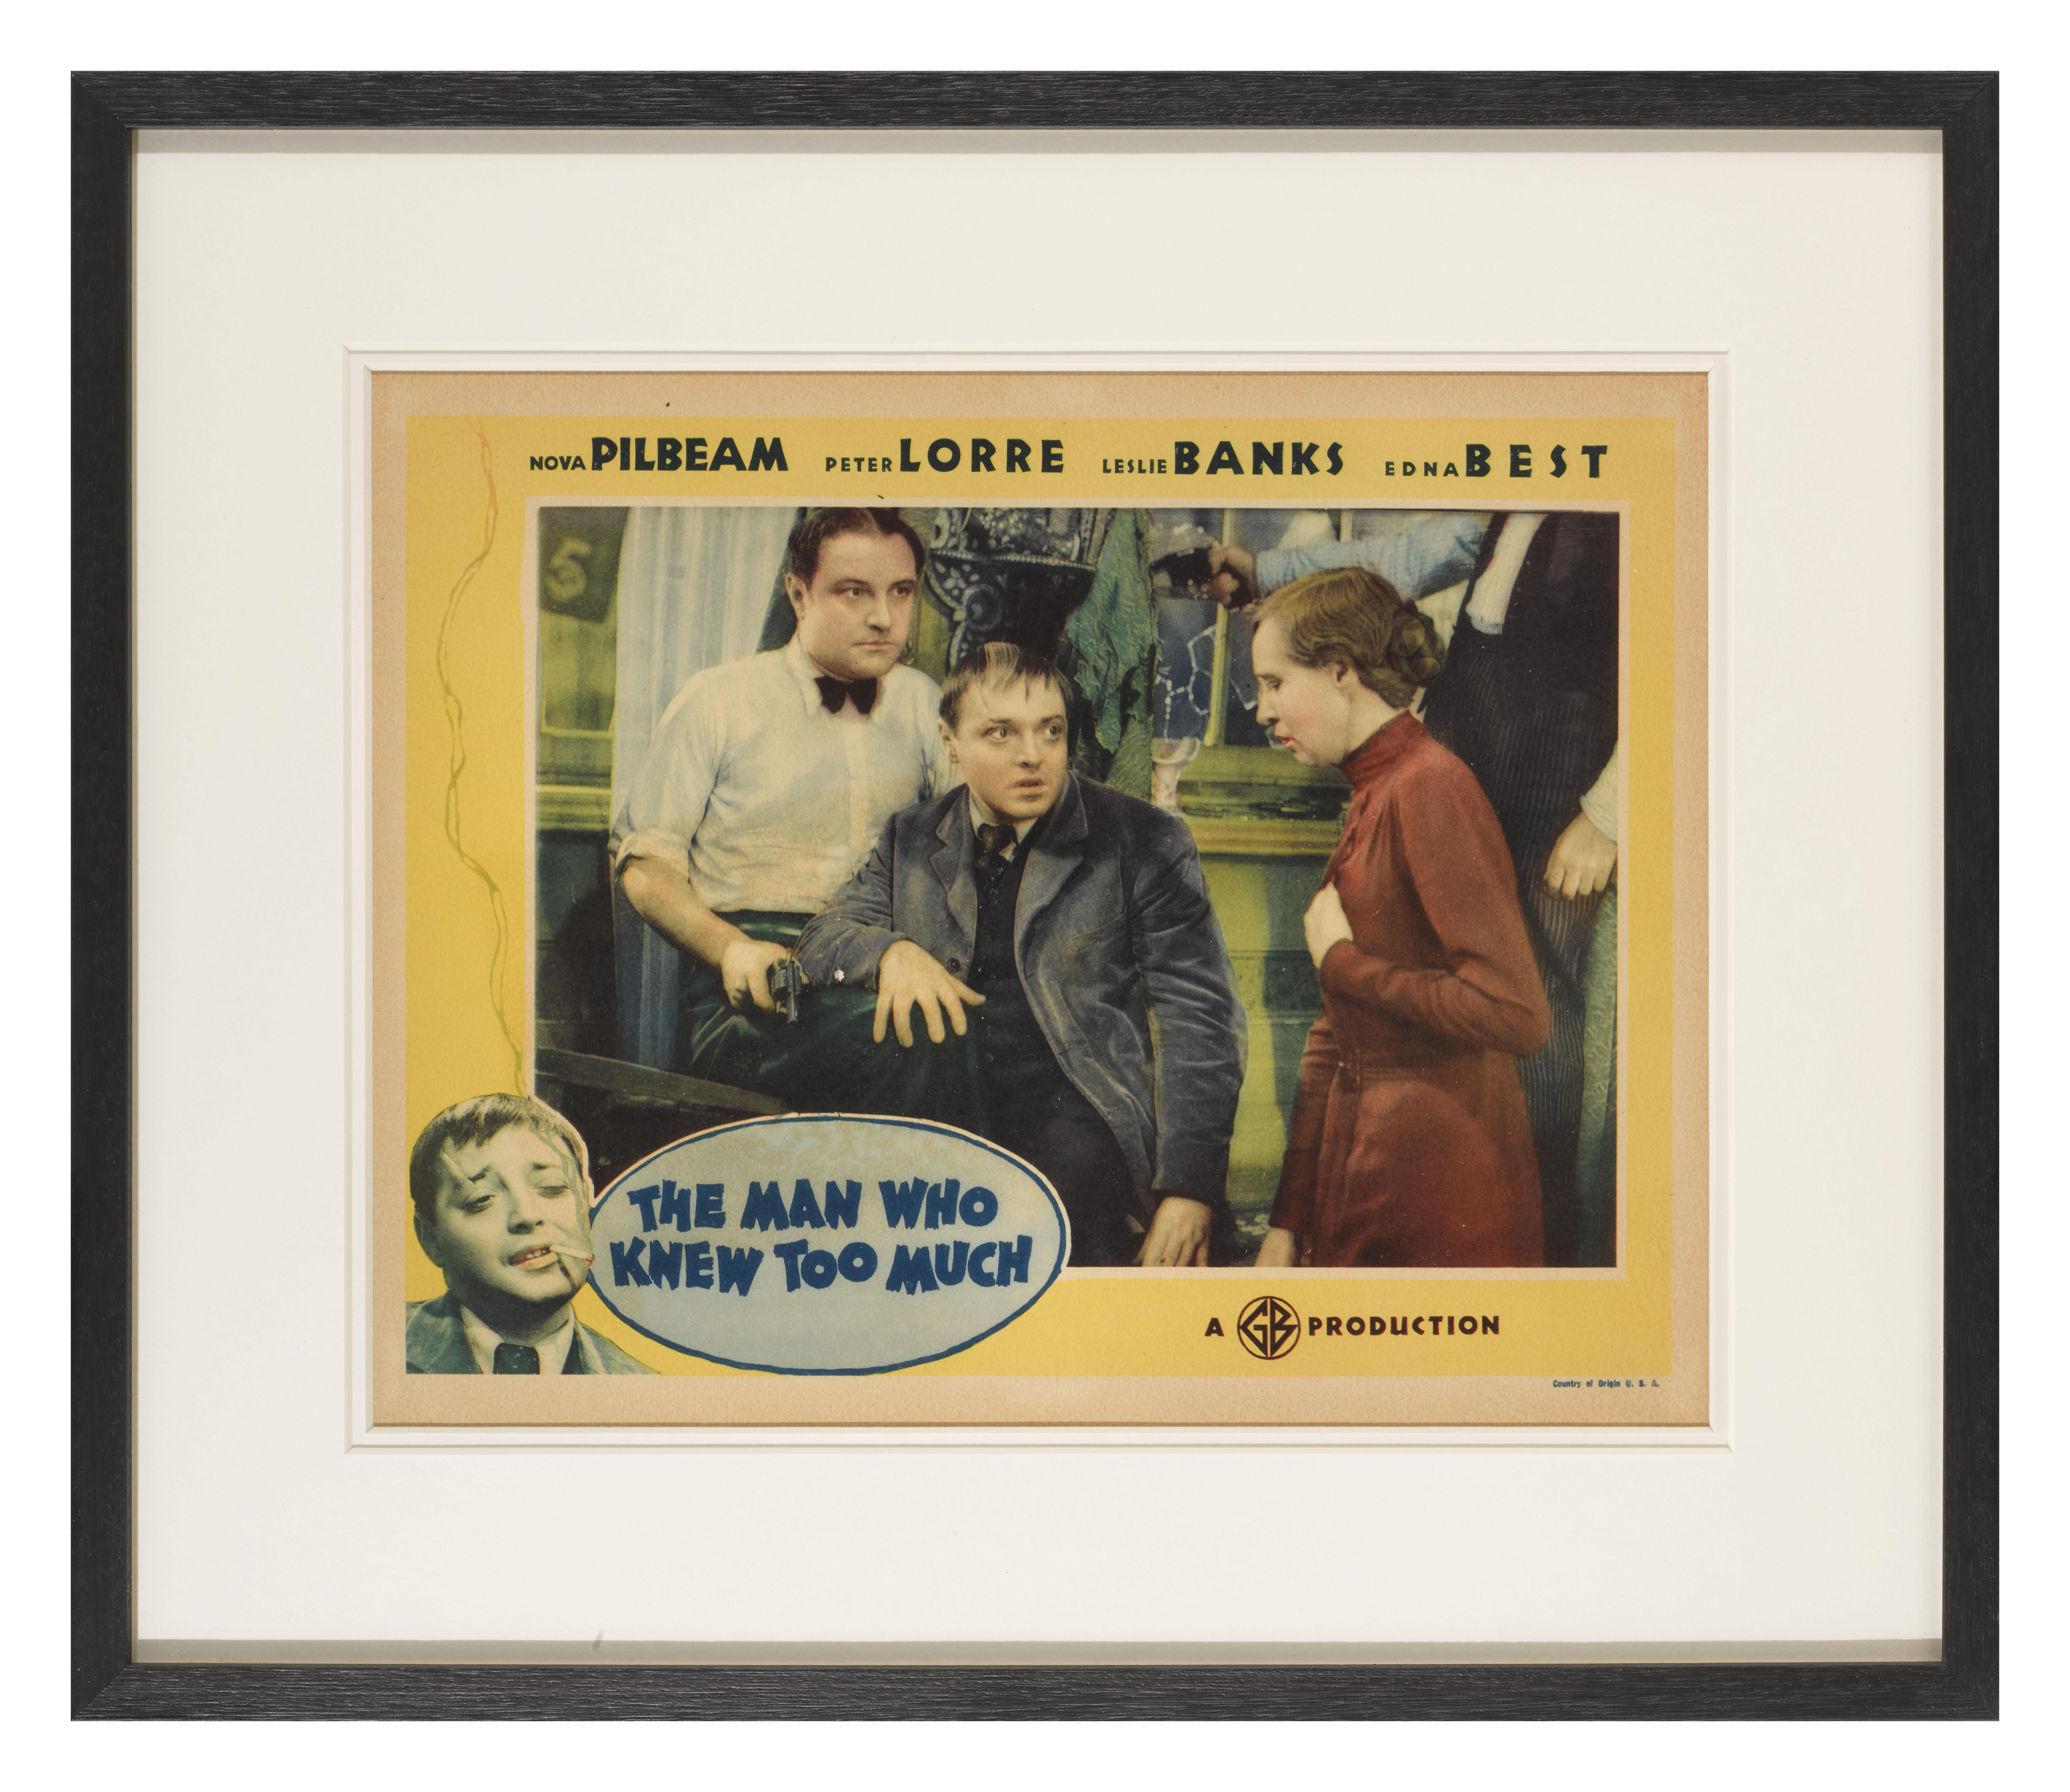 A rare and important original US lobby card for Alfred Hitchcock's 1934 Spy crime film The Man Who Knew Too Much.
This film starred Peter Lorre.
There are not even 2 full lobby card sets known to have survived on this classic 1930's  Hitchcock